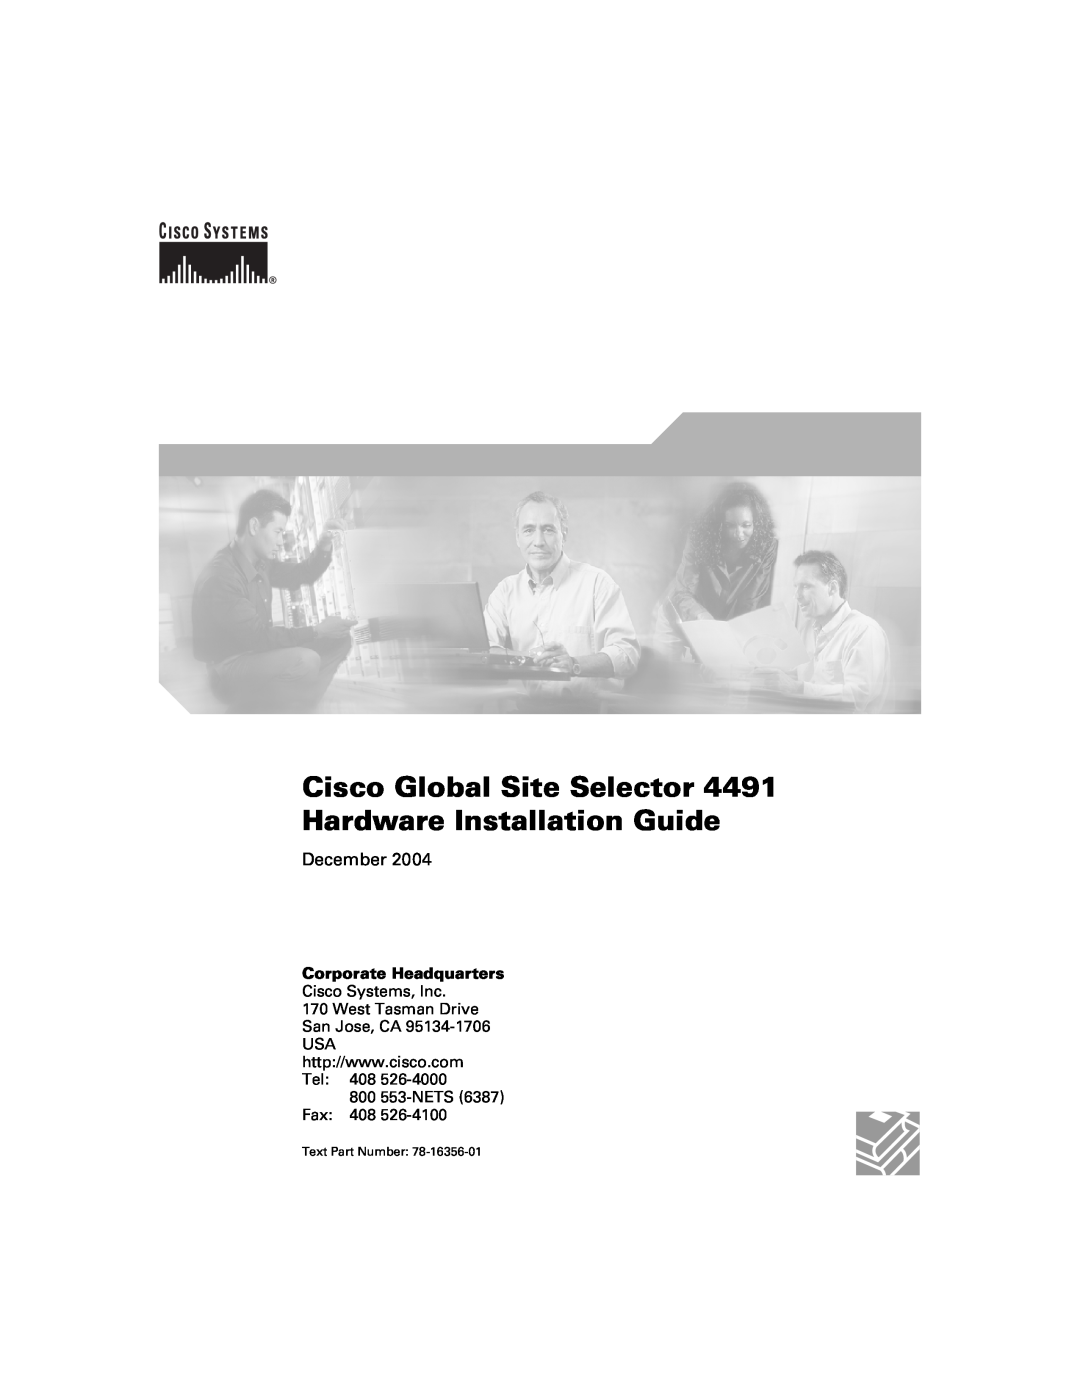 Cisco Systems 78-16356-01 manual Cisco Global Site Selector 4491 Hardware Installation Guide, December, Text Part Number 